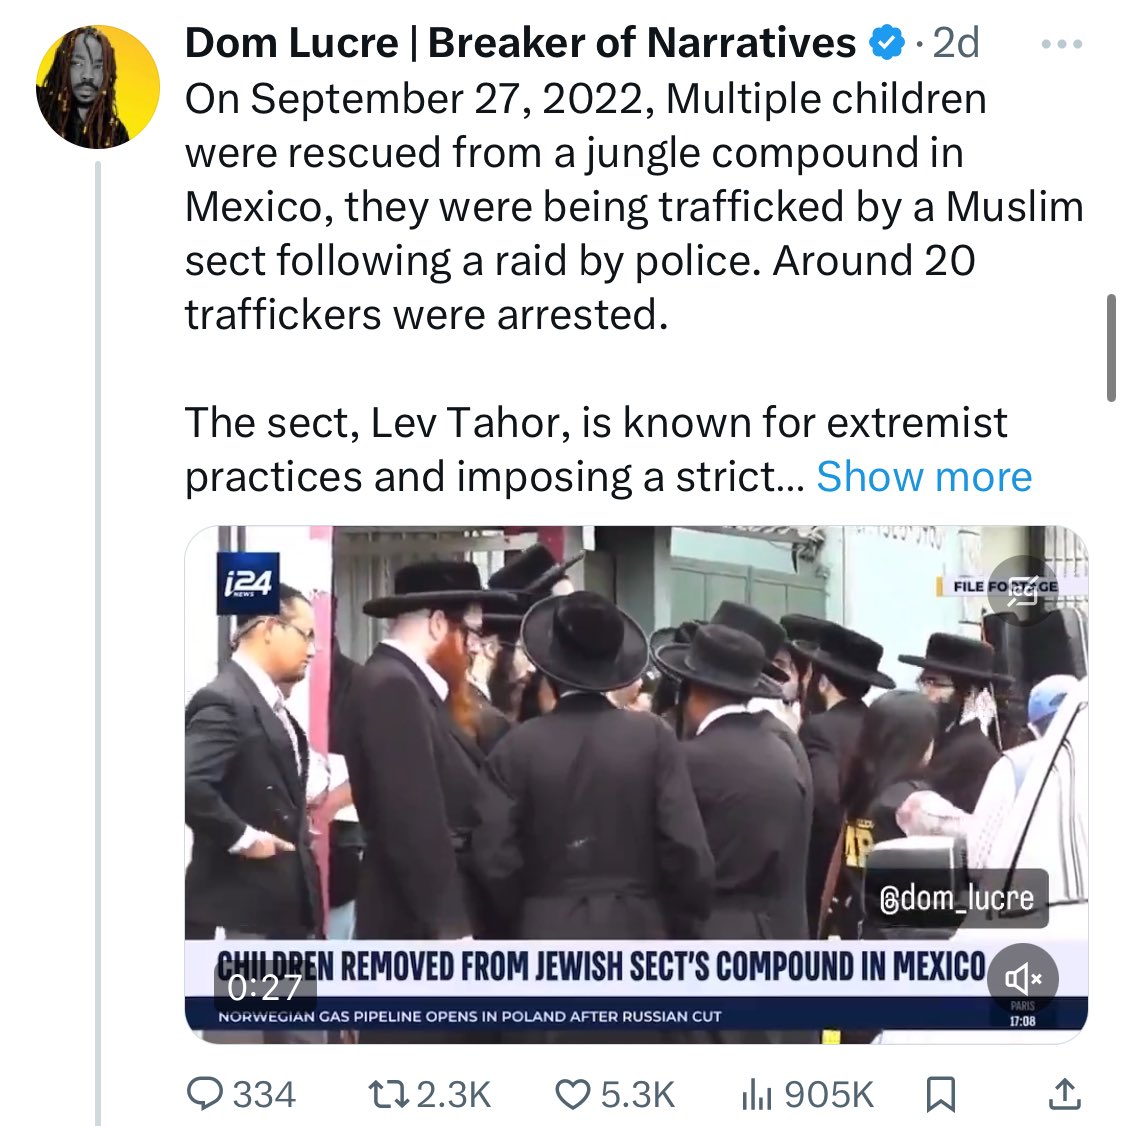 Is @dom_lucre lazy or just another “bought & sold presstitute”? (I believe @OneAddyAdds wrote the latter)— the news clip clearly states “Jewish sect” but Dom, your post still reads “Muslim sect” ! Bro, u gotta a blue ✓! Takes two seconds to edit the post so it’s 100% ACCURATE